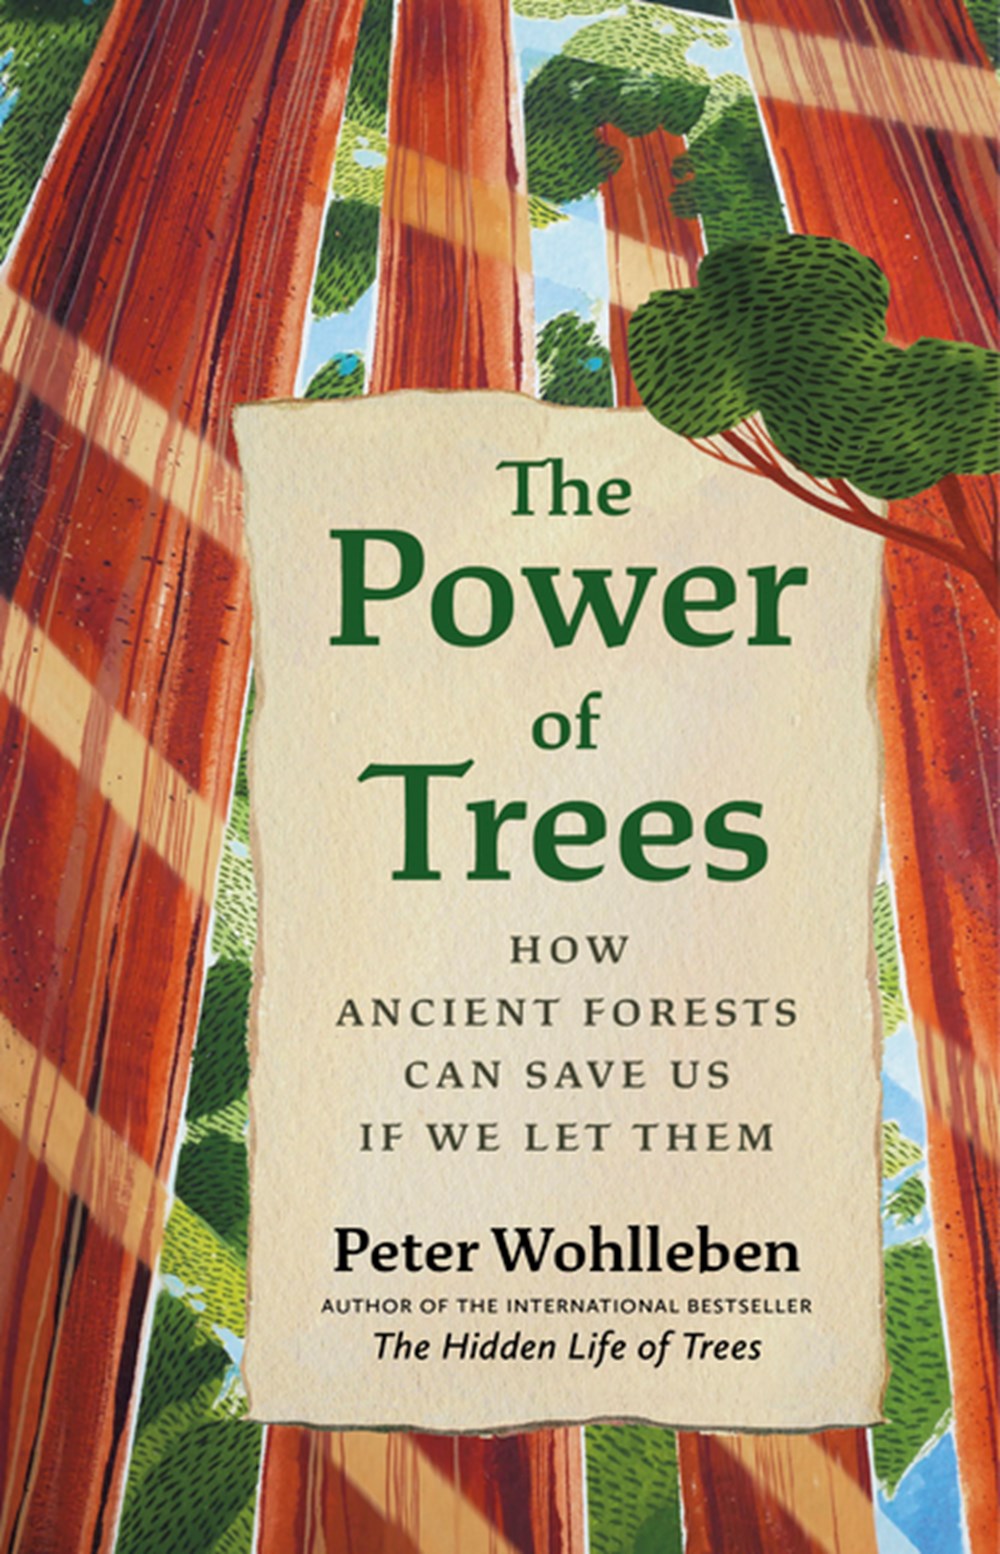 Power of Trees: How Ancient Forests Can Save Us If We Let Them